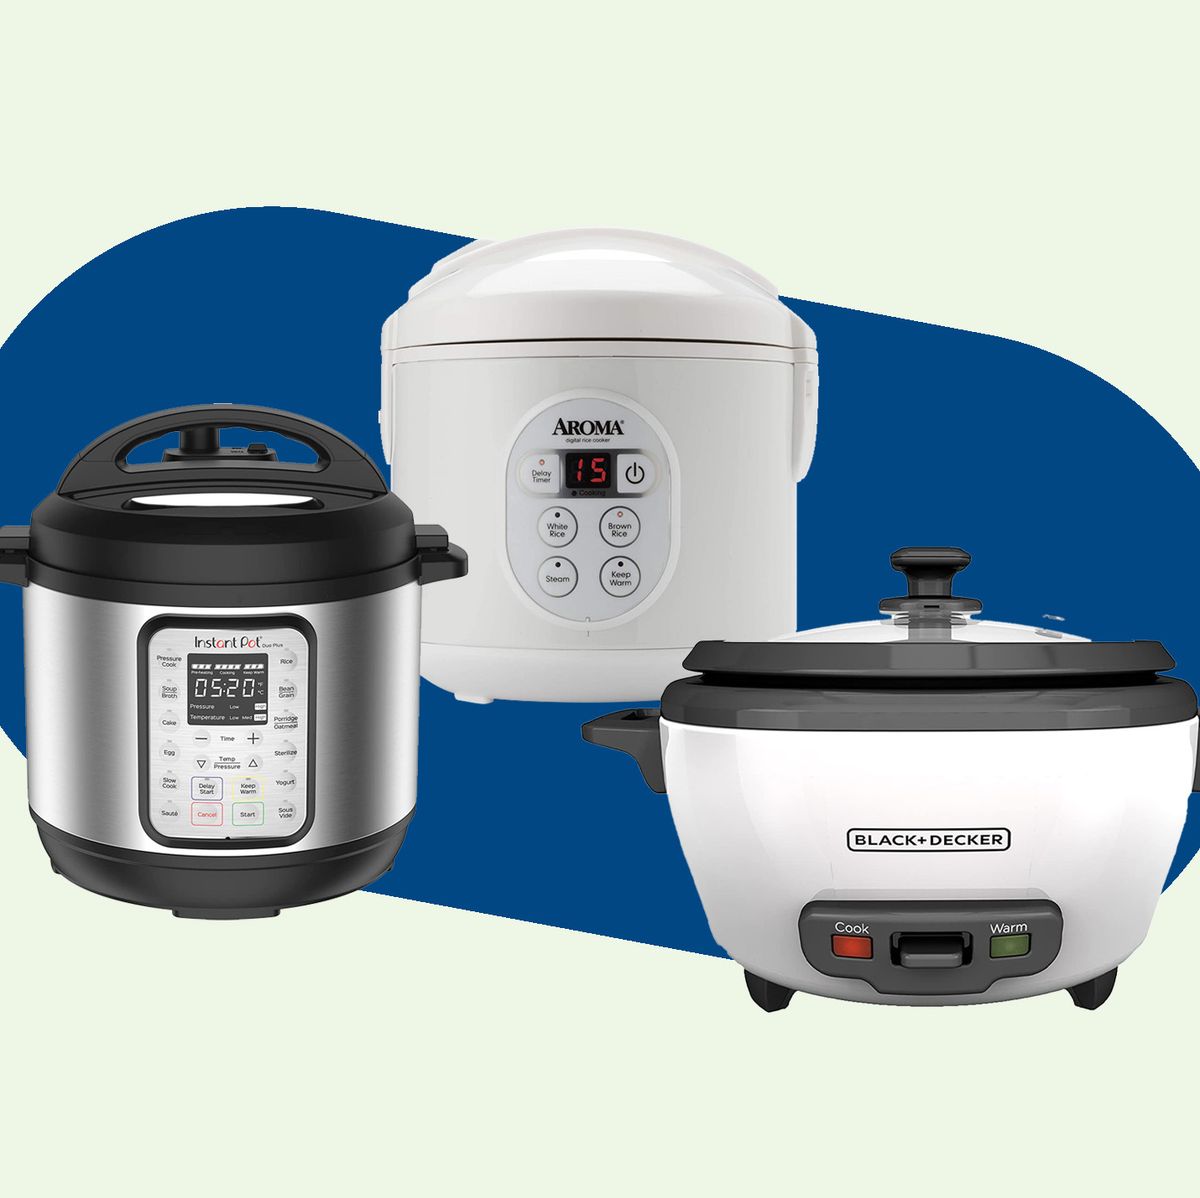 8 Healthy Rice Cookers with Stainless Steel Inner Pot and Reviews